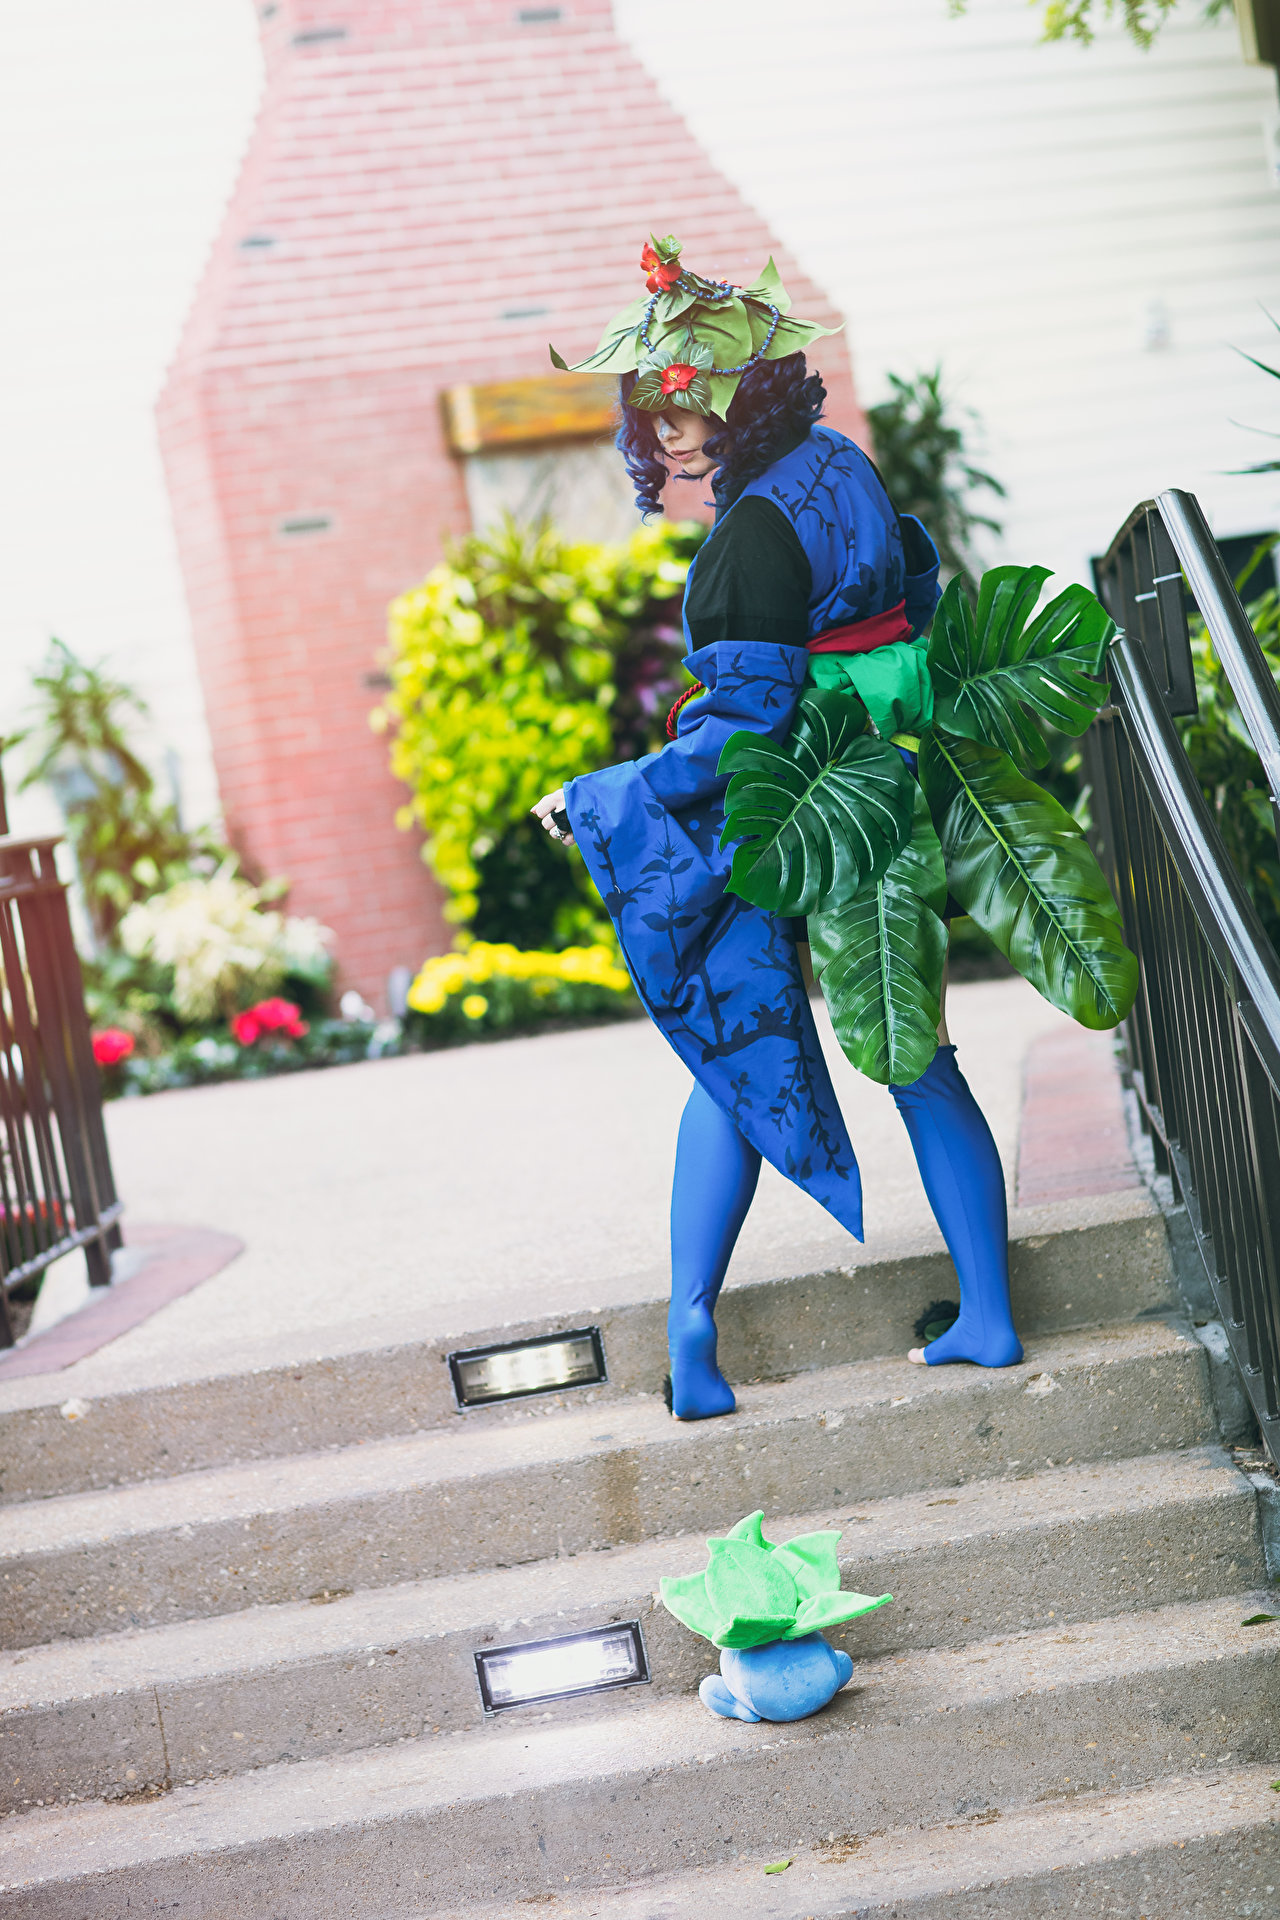 Cospix.net photo featuring Octography and Vicious Cosplay